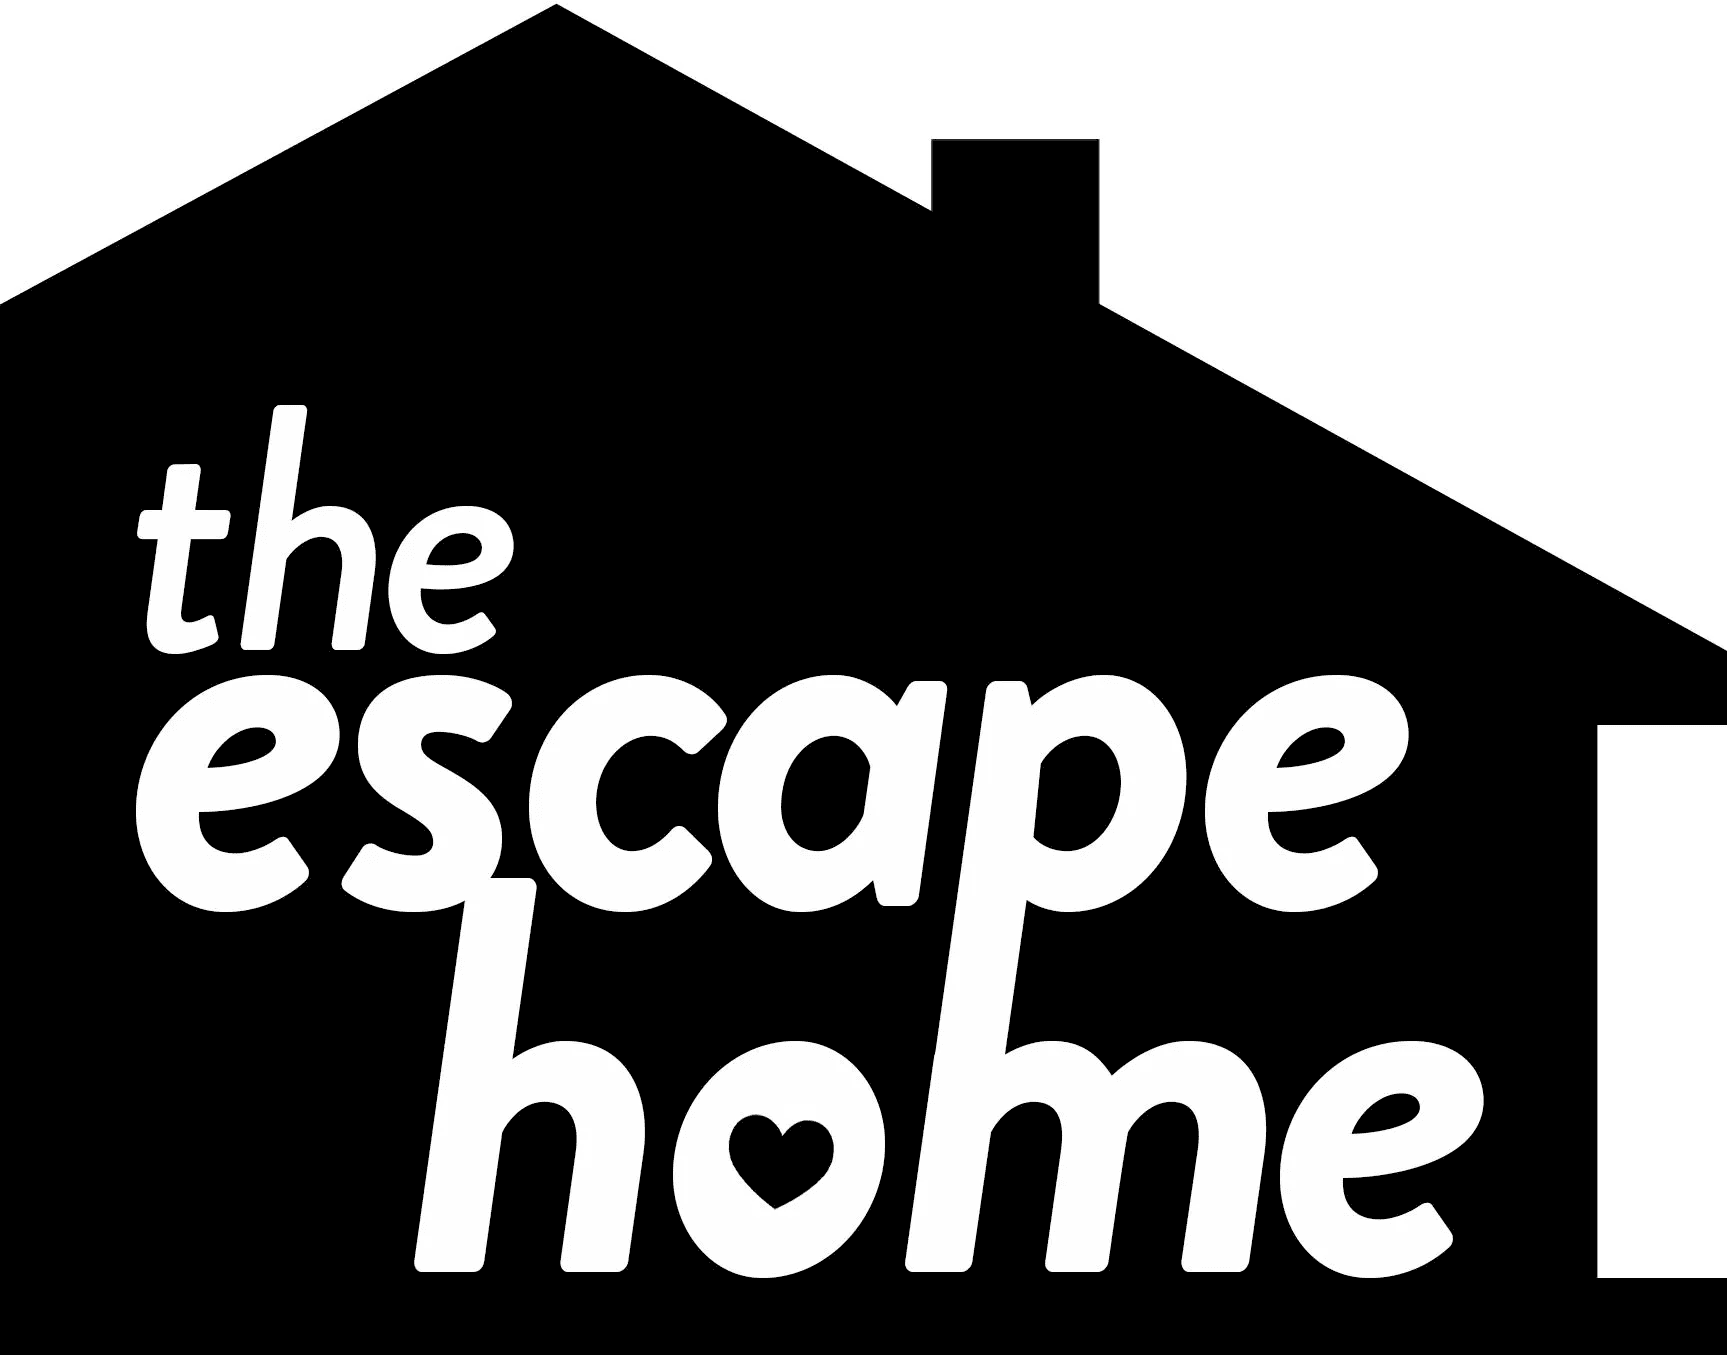 Black silhouette of a house with the text "the escape home" integrated into the design, creating the shape of the house.